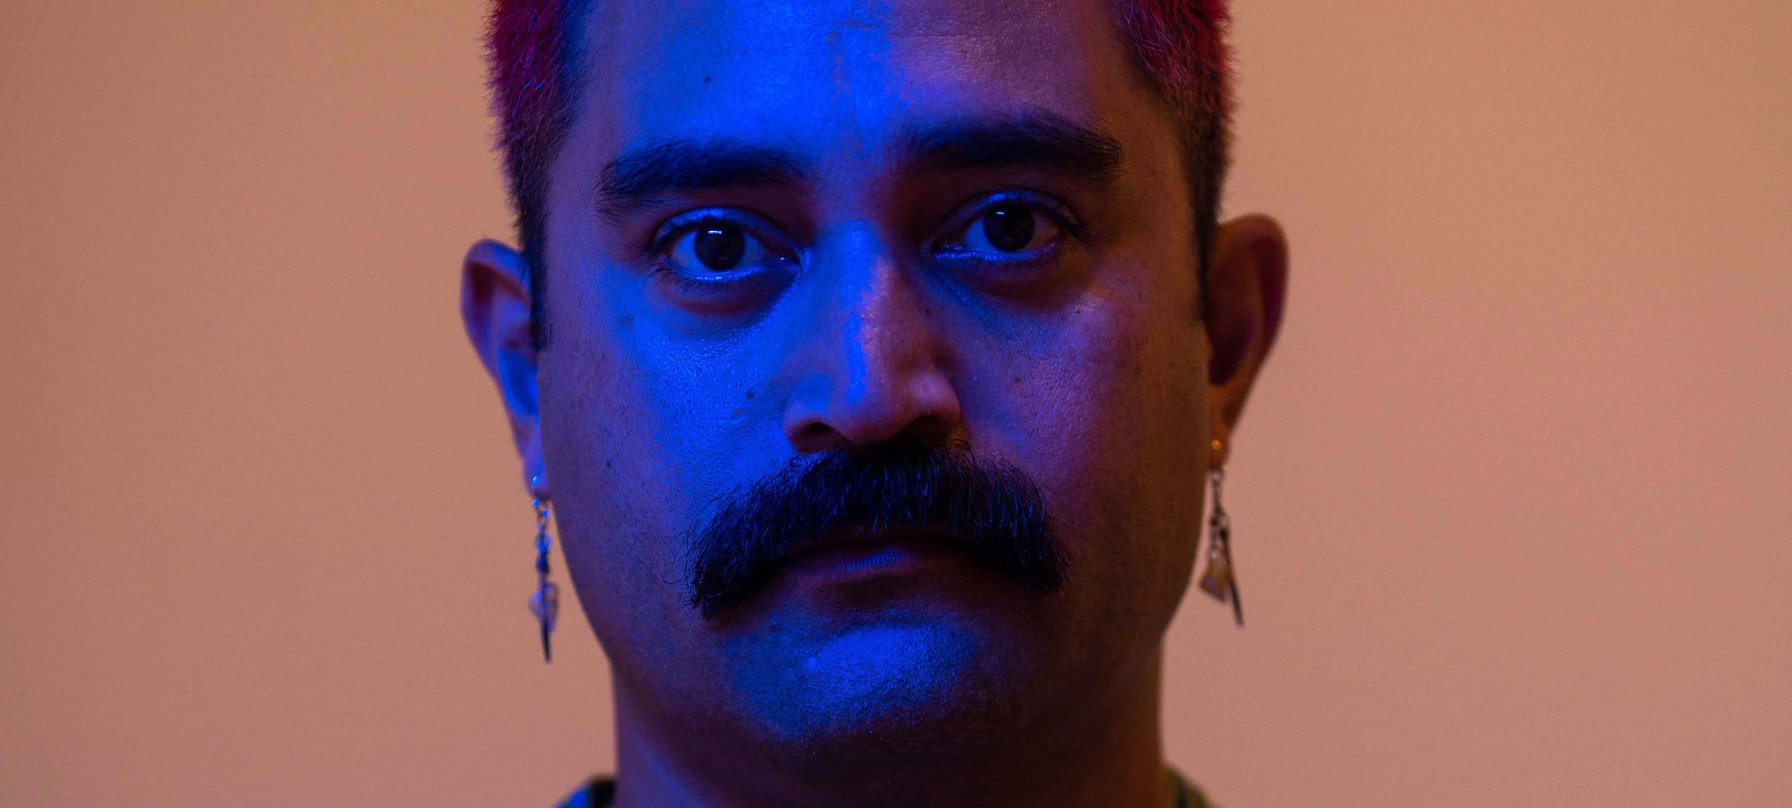 A photo of Léuli Eshrāghi looking at the camera with a dusty pink back ground and a blue light over their face. Léuli has tanned skin, red-dyed hair quiffed atop their head and a moustache that most would envy the lushness of. Credit Rhett Hammerton.